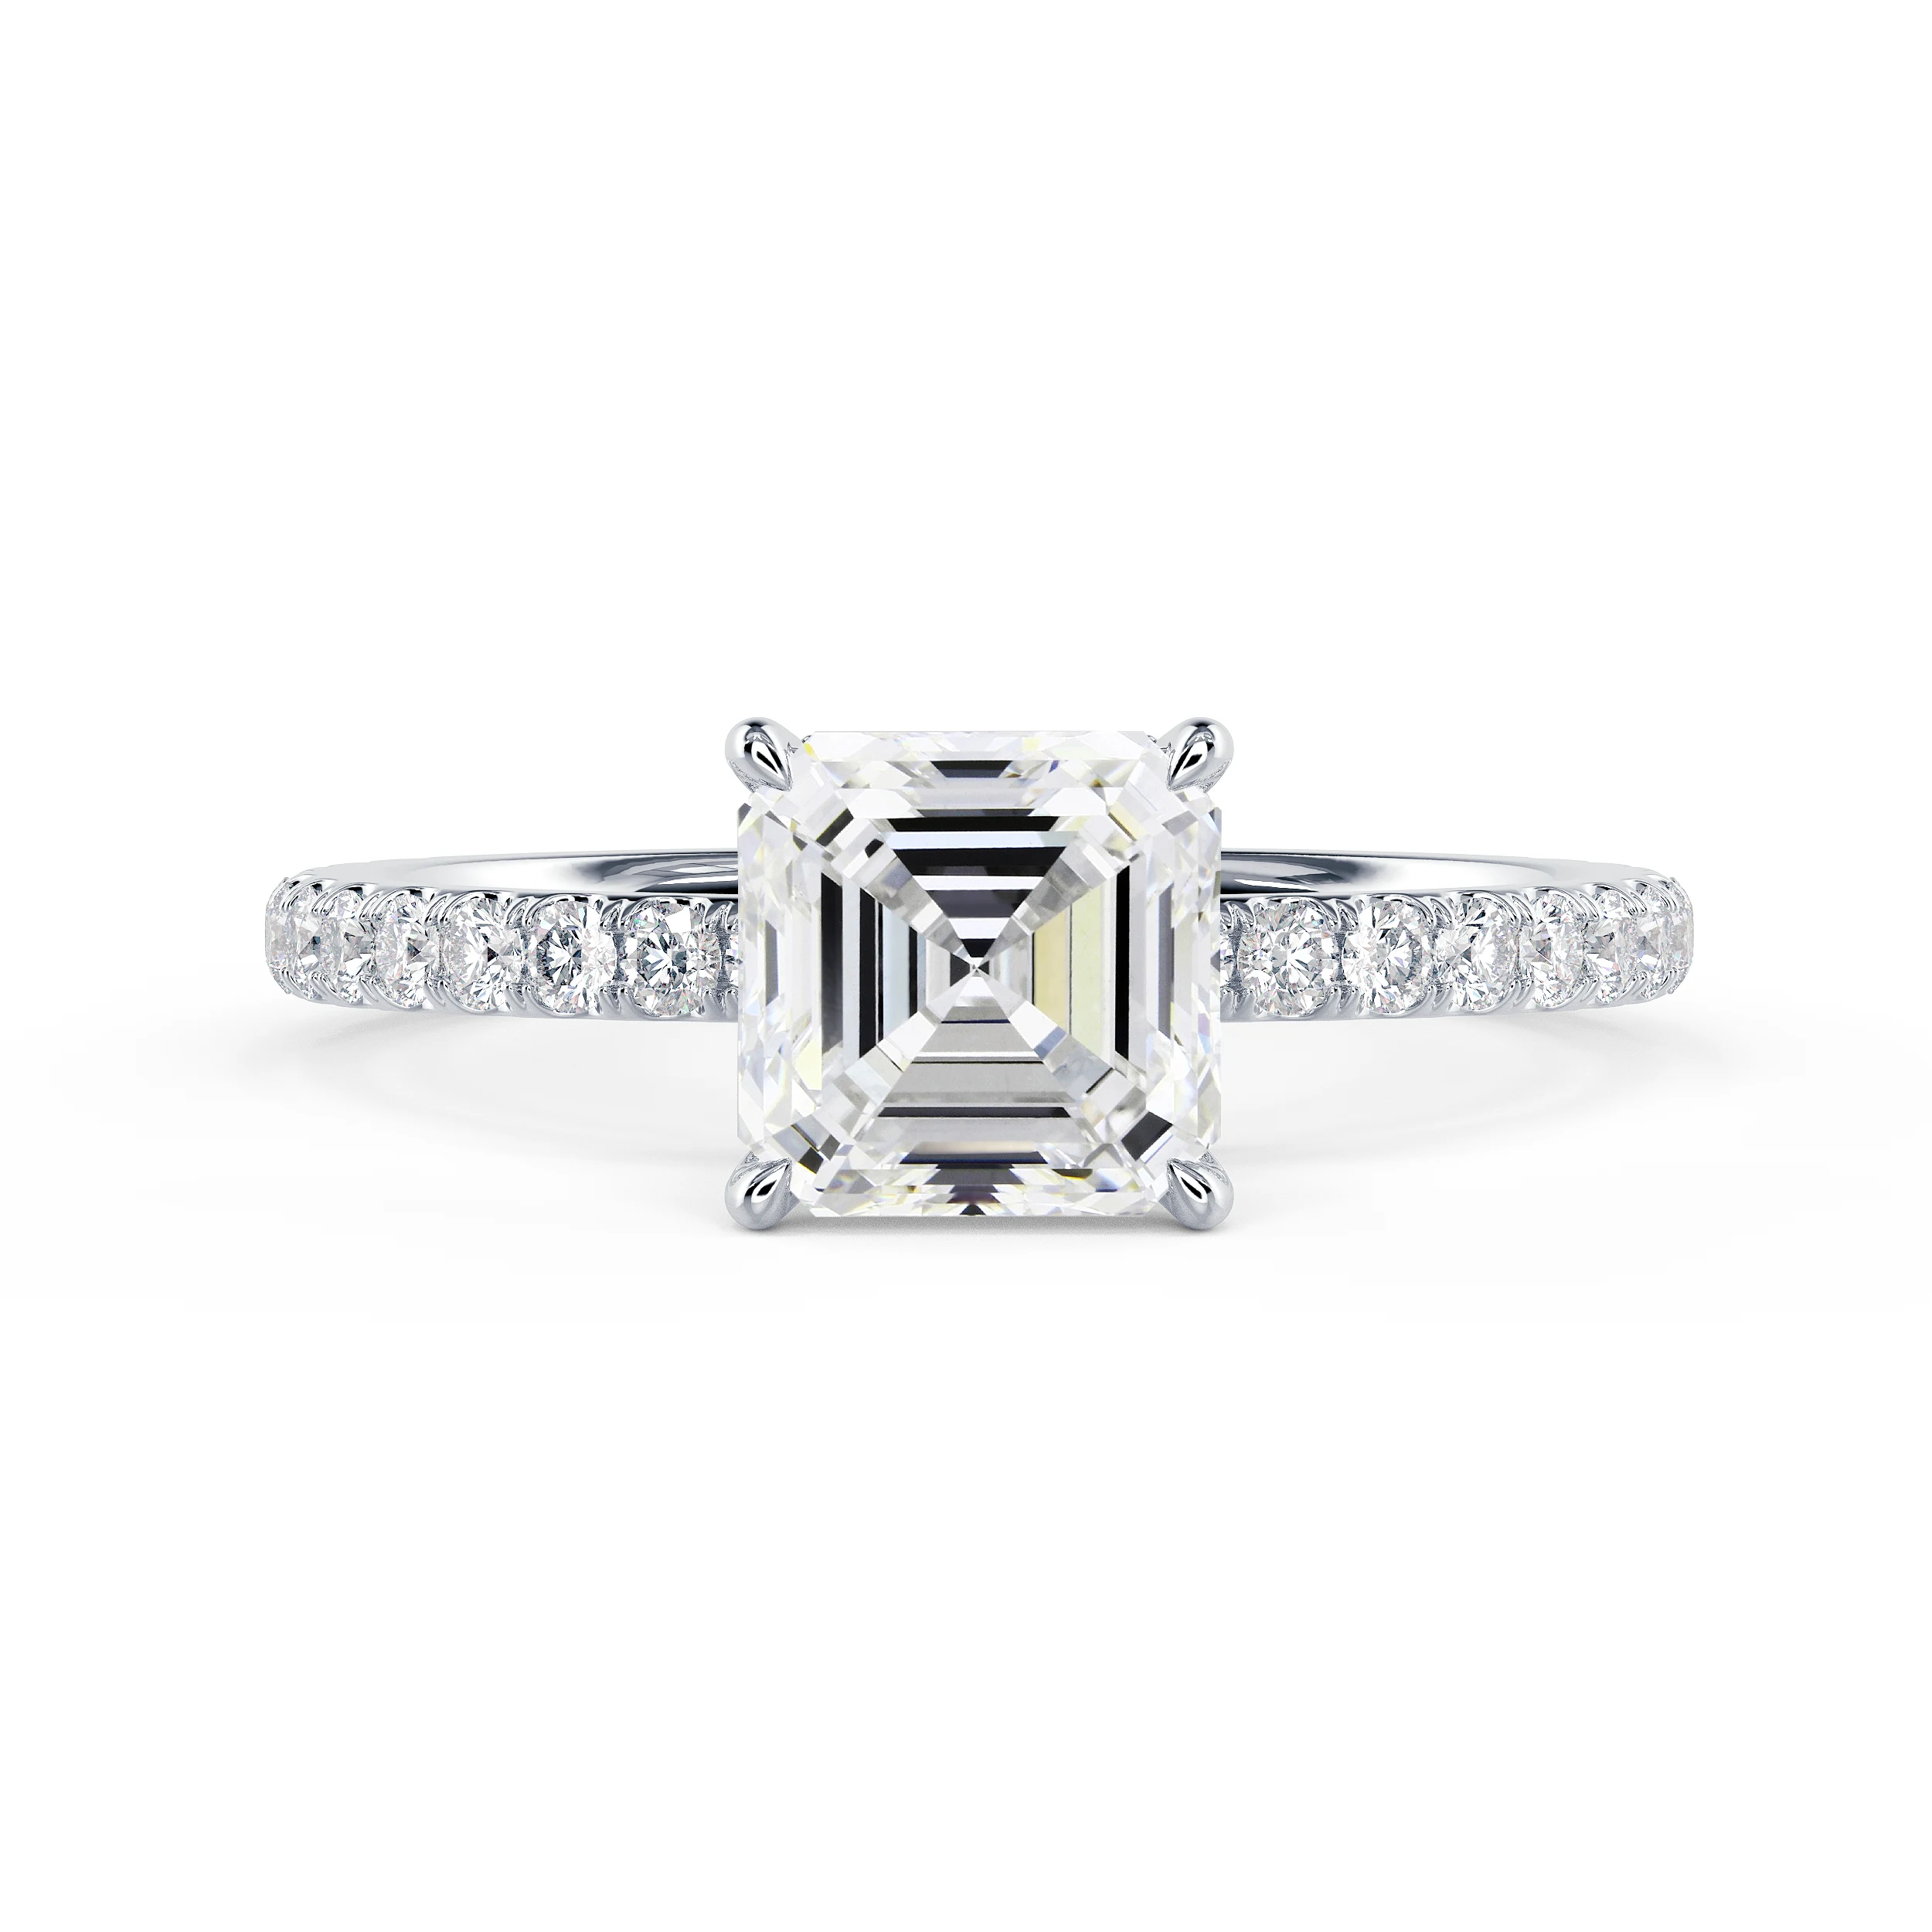 Exceptional Quality Diamonds set in White Gold Asscher Petite Four Prong Pavé Diamond Engagement Ring (Main View)